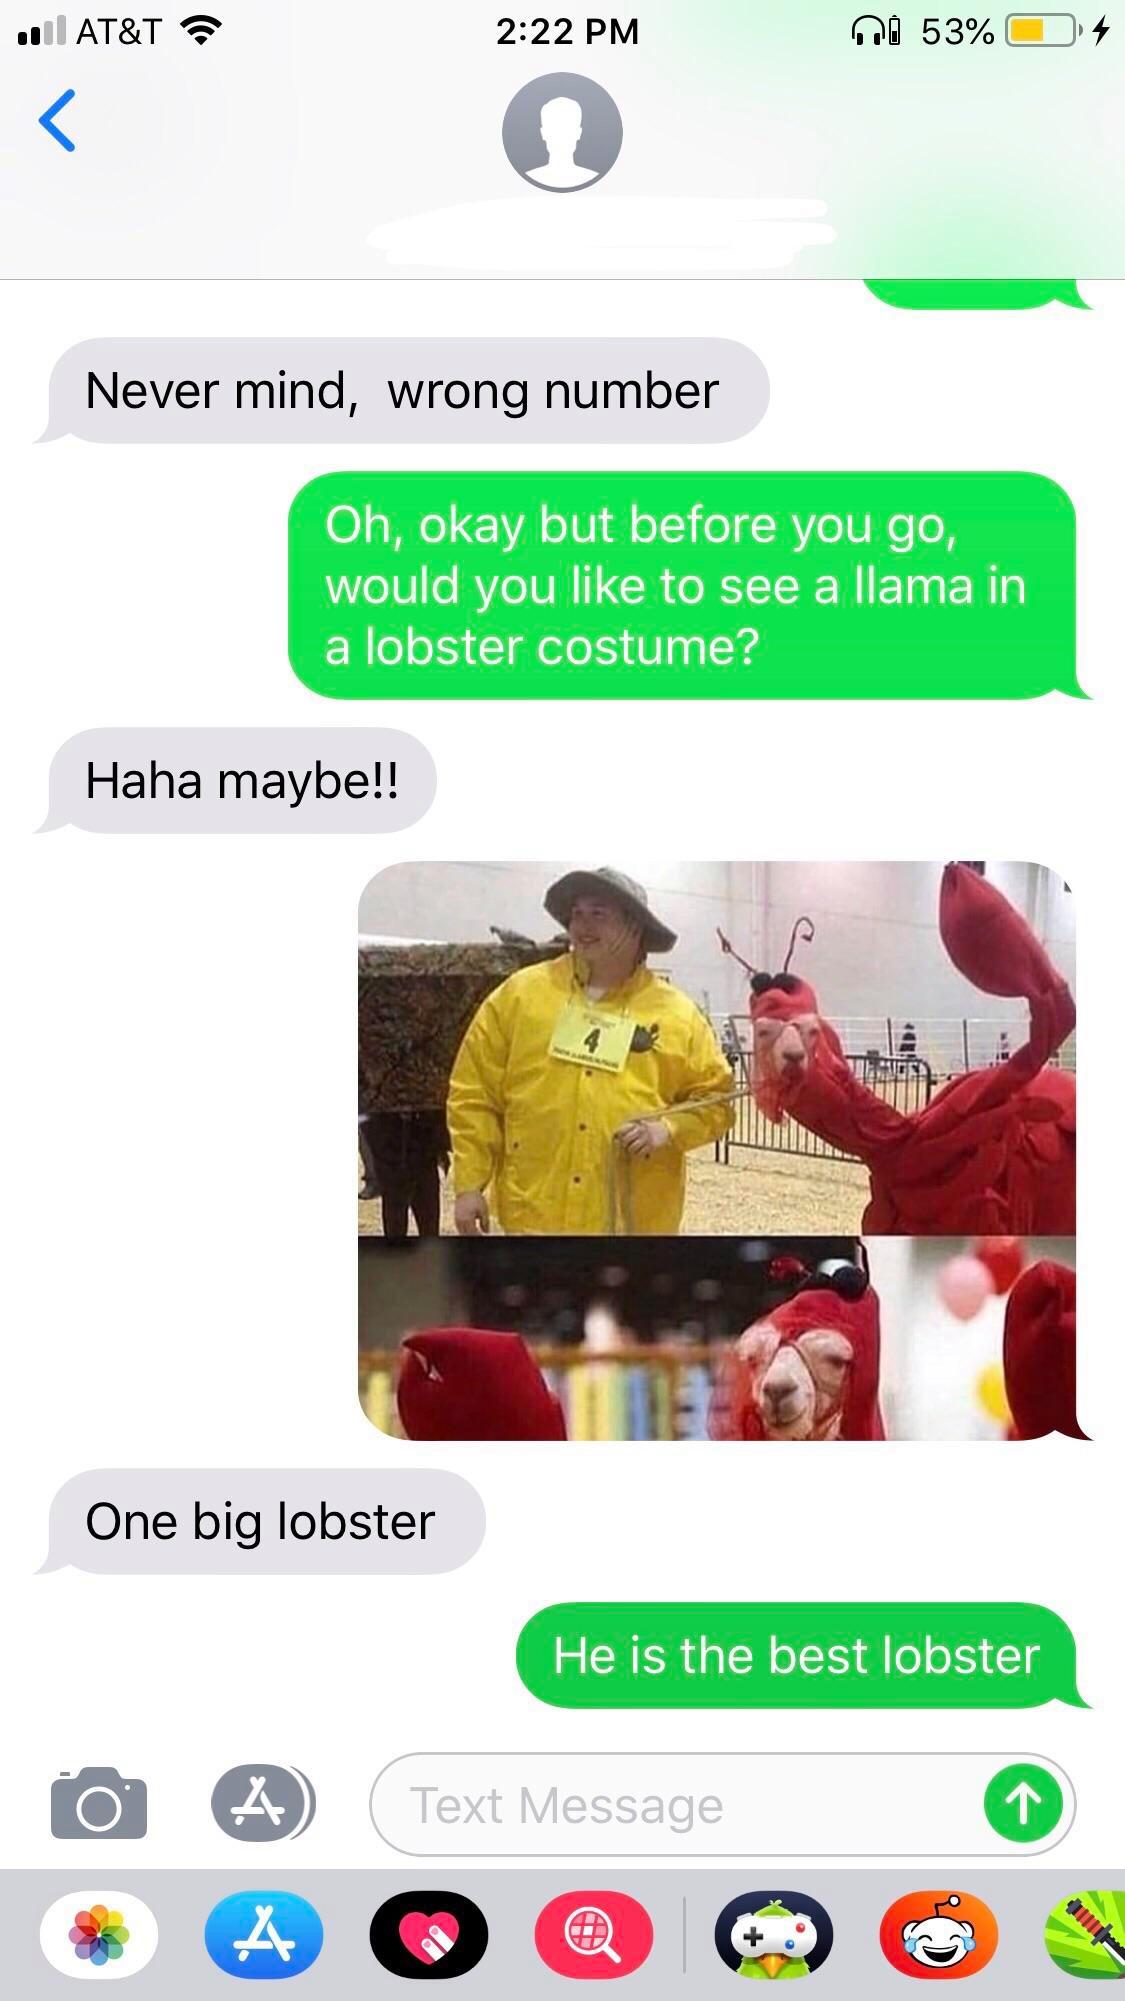 wrong number text message with link - 11 At&T o ni 53% 4 Never mind, wrong number Oh, okay but before you go, would you to see a llama in a lobster costume? Haha maybe!! One big lobster He is the best lobster Text Message